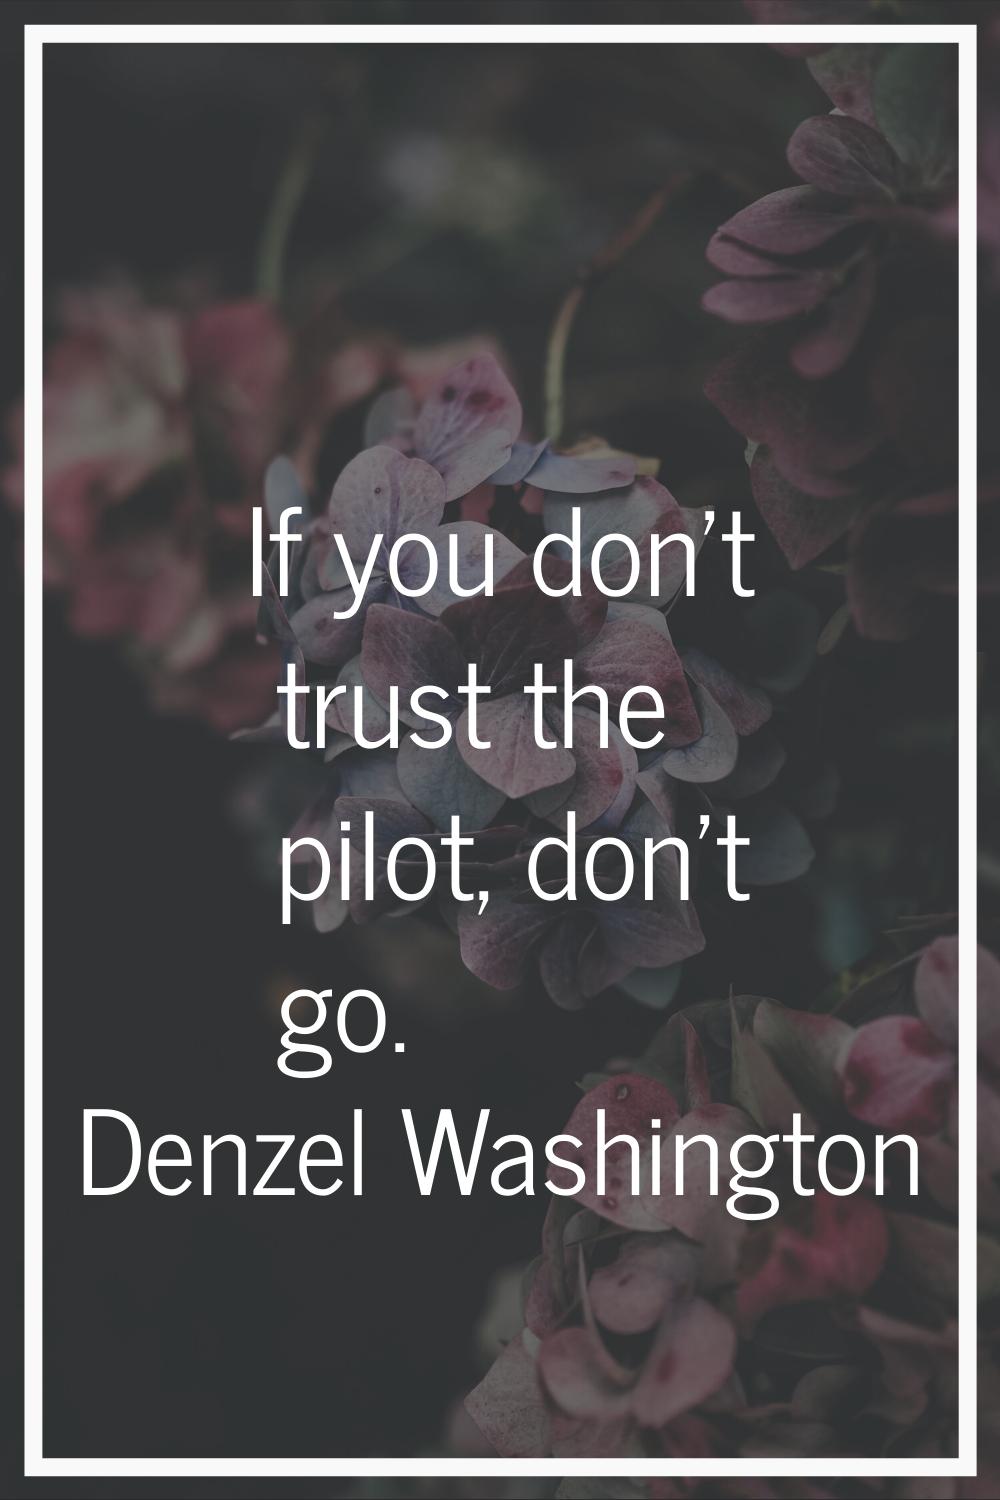 If you don't trust the pilot, don't go.